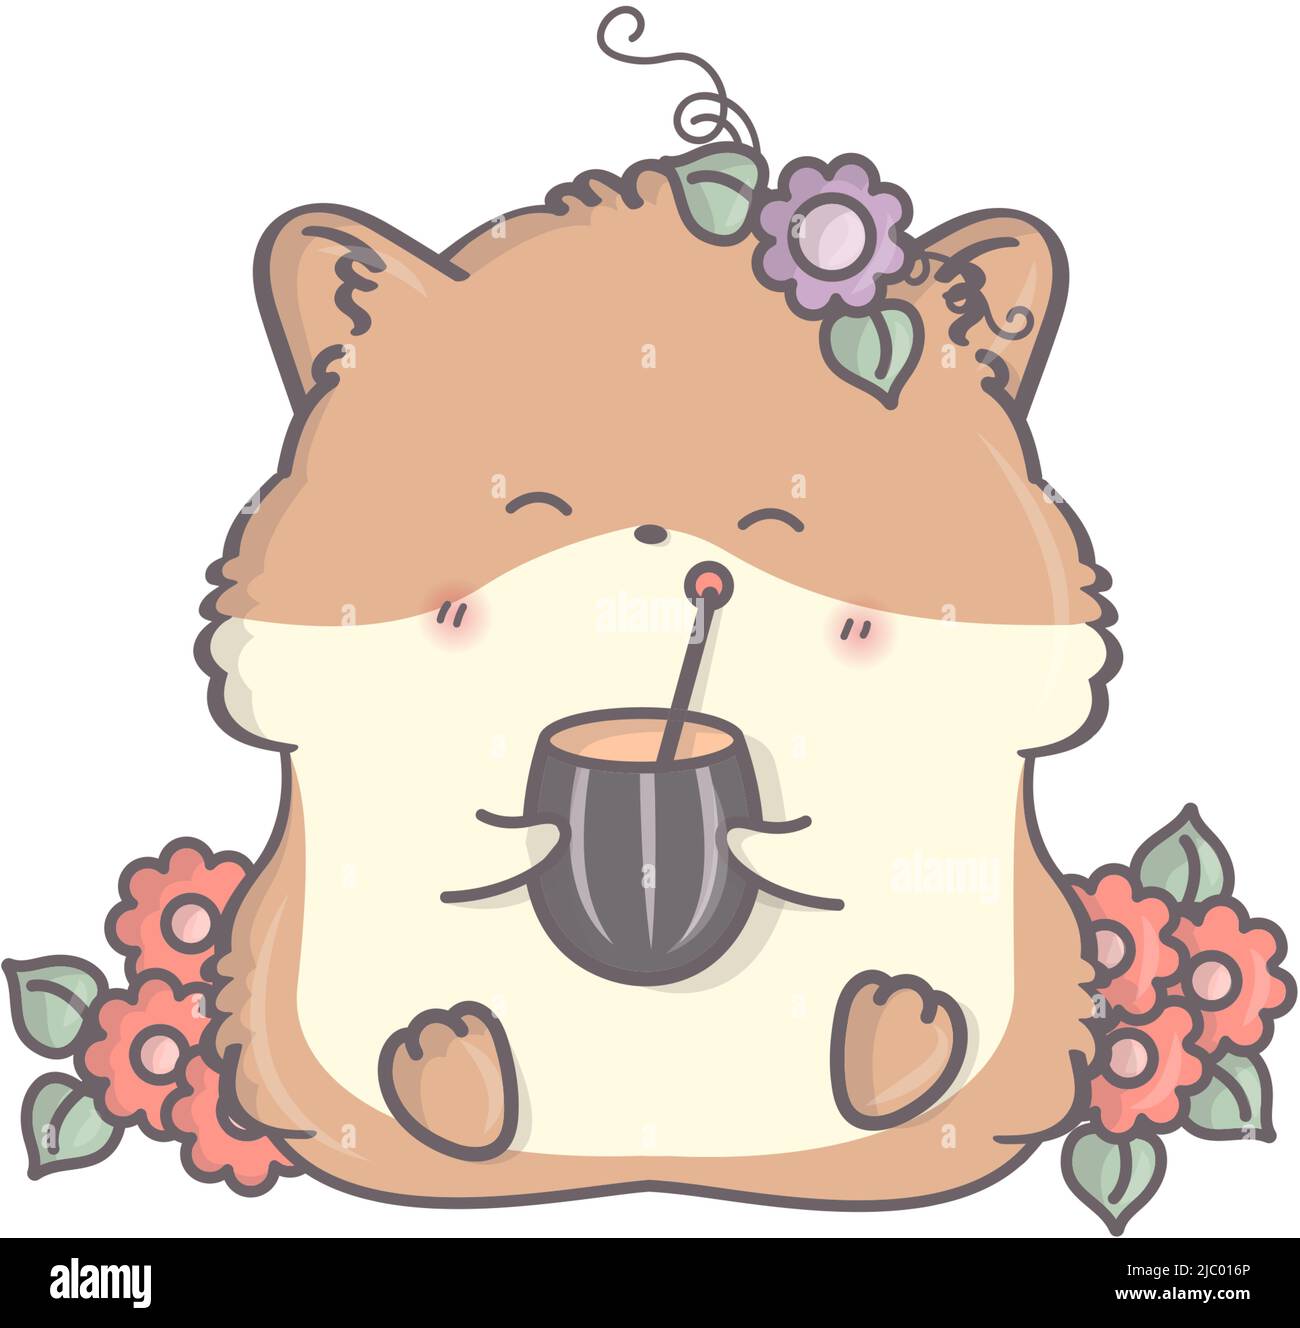 Kawaii illustration of a smiling hamster. Vector illustration of a cute animal. Cute little illustration of hamster for kids, fairy tales, covers Stock Vector